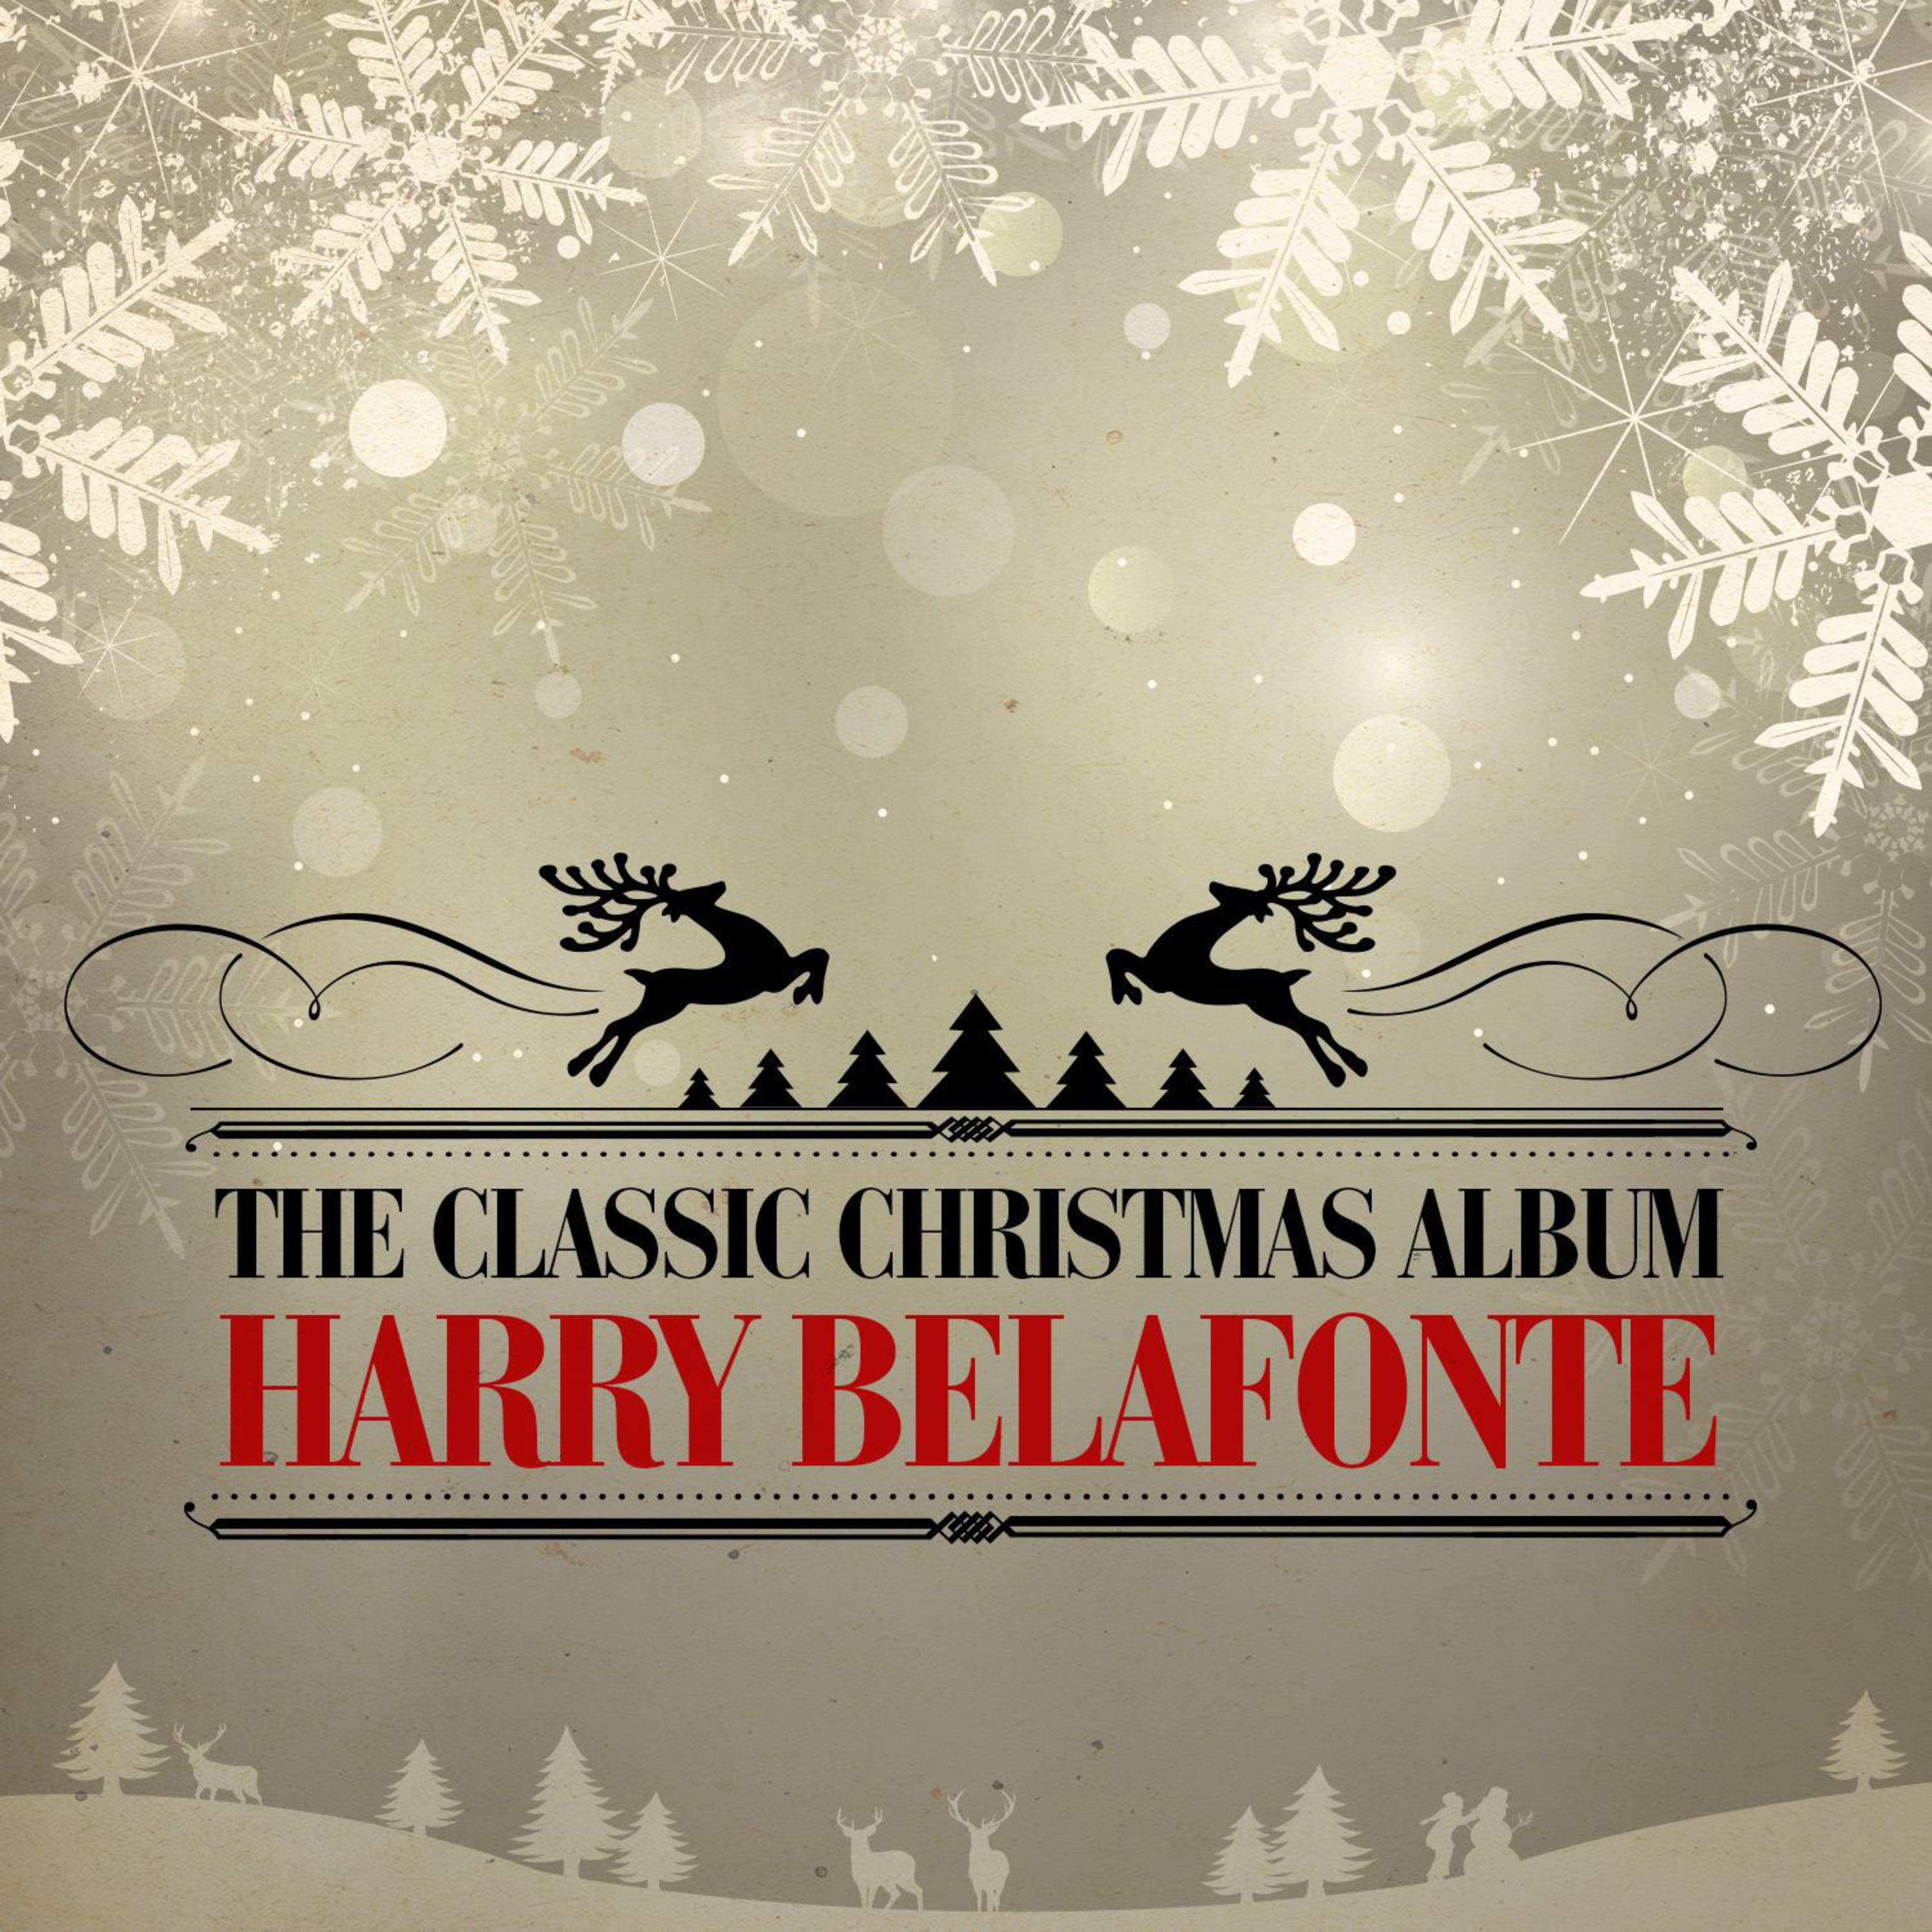 Medley: We Wish You a Merry Christmas / God Rest Ye Merry Gentlemen / O Come All Ye Faithful / Joy to the World (Remastered)